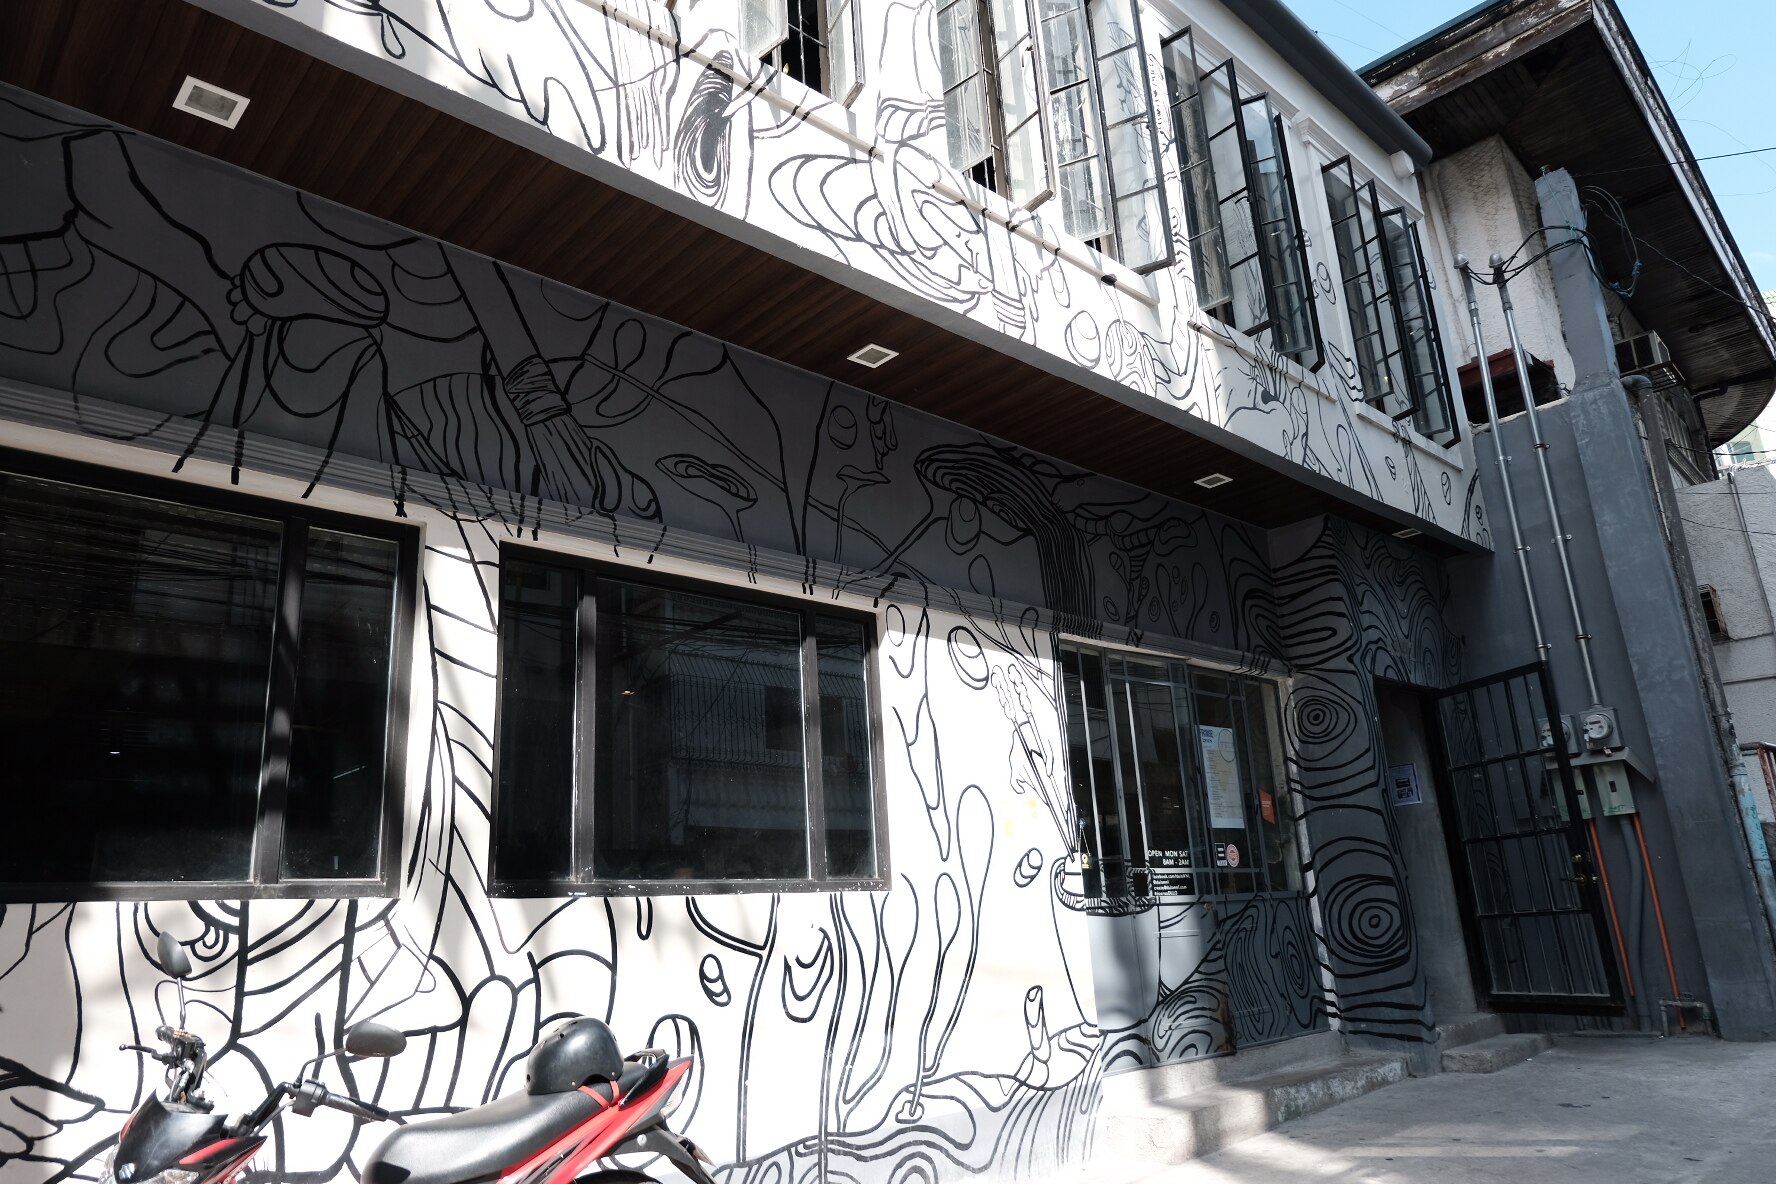 If you’re looking for a creative spot, this caf&#233; in Poblacion could be it. 3